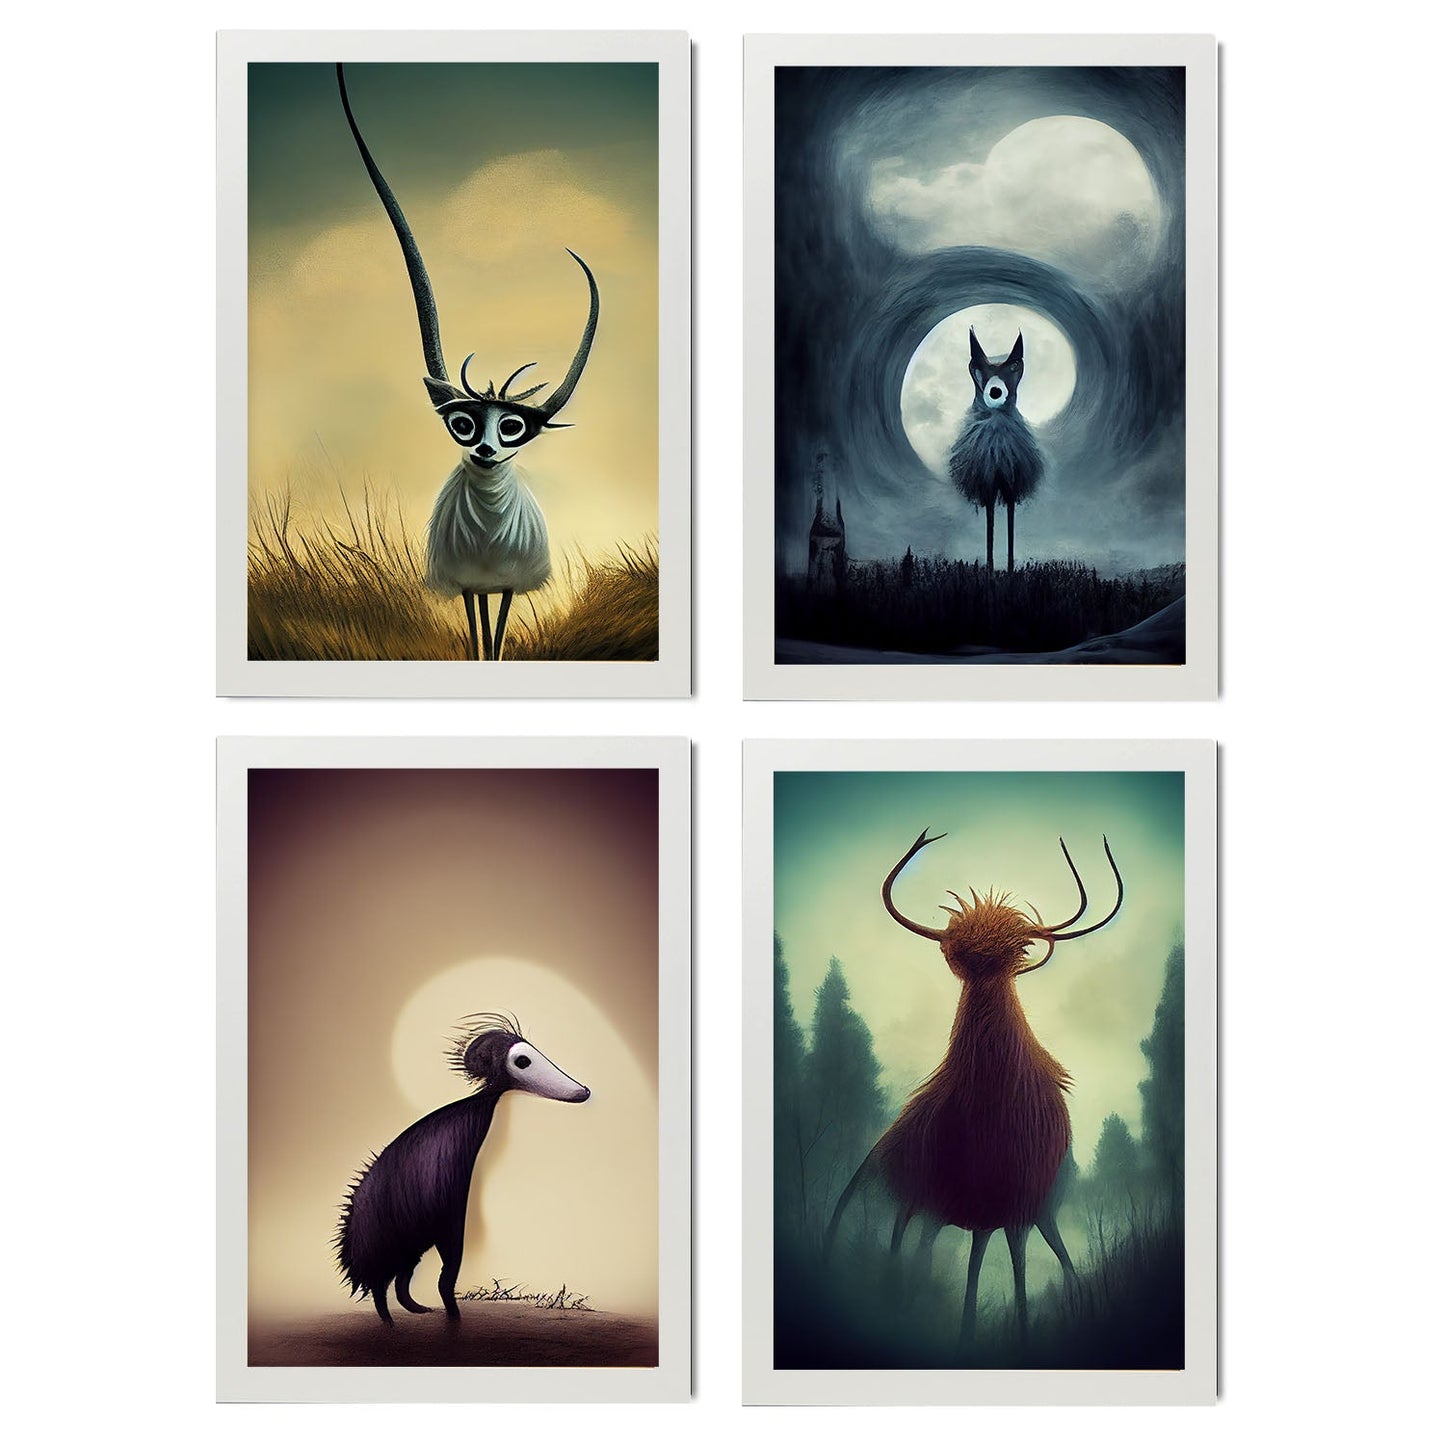 Burton style Animal Illustrations and Posters inspired by Burton's Dark and Goth art Interior Design and Decoration Set Collection 1-Artwork-Nacnic-A4-Marco Blanco-Nacnic Estudio SL